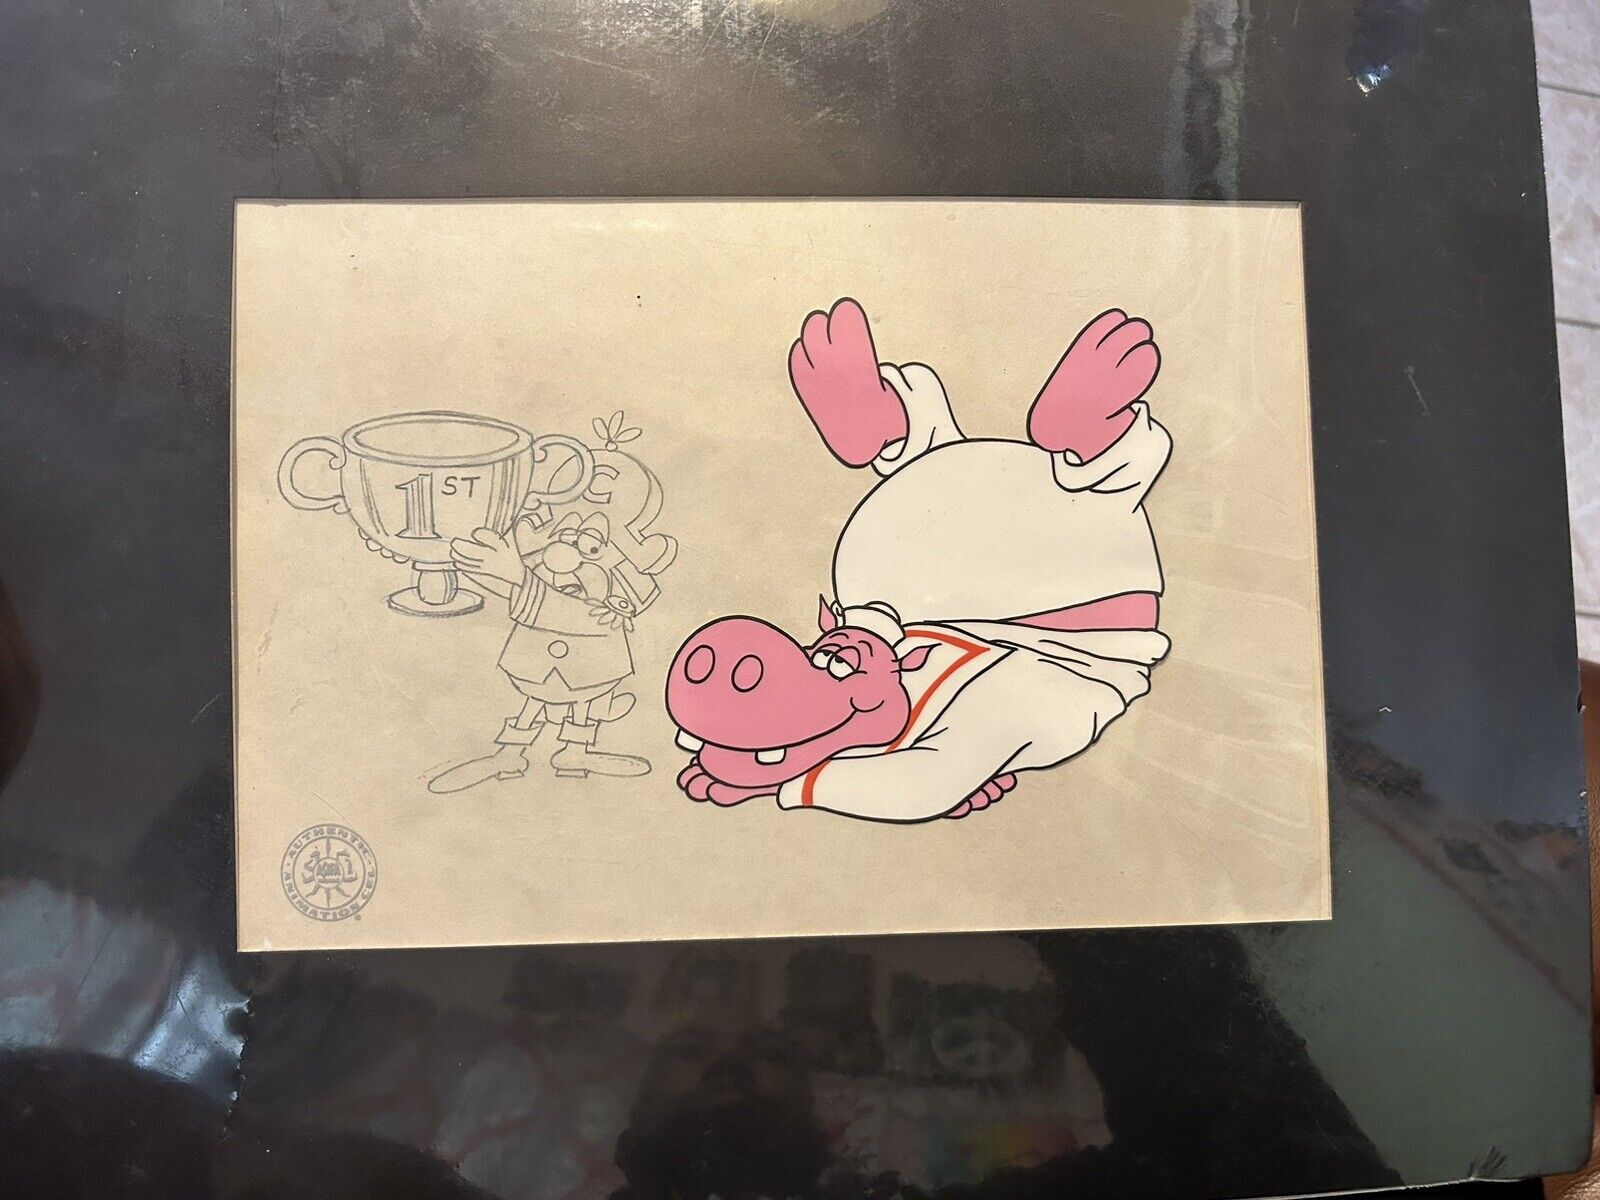 Captain Crunch Punch Crunch Cereal Commercial Cel Harry S. Hippo, 1970's RARE